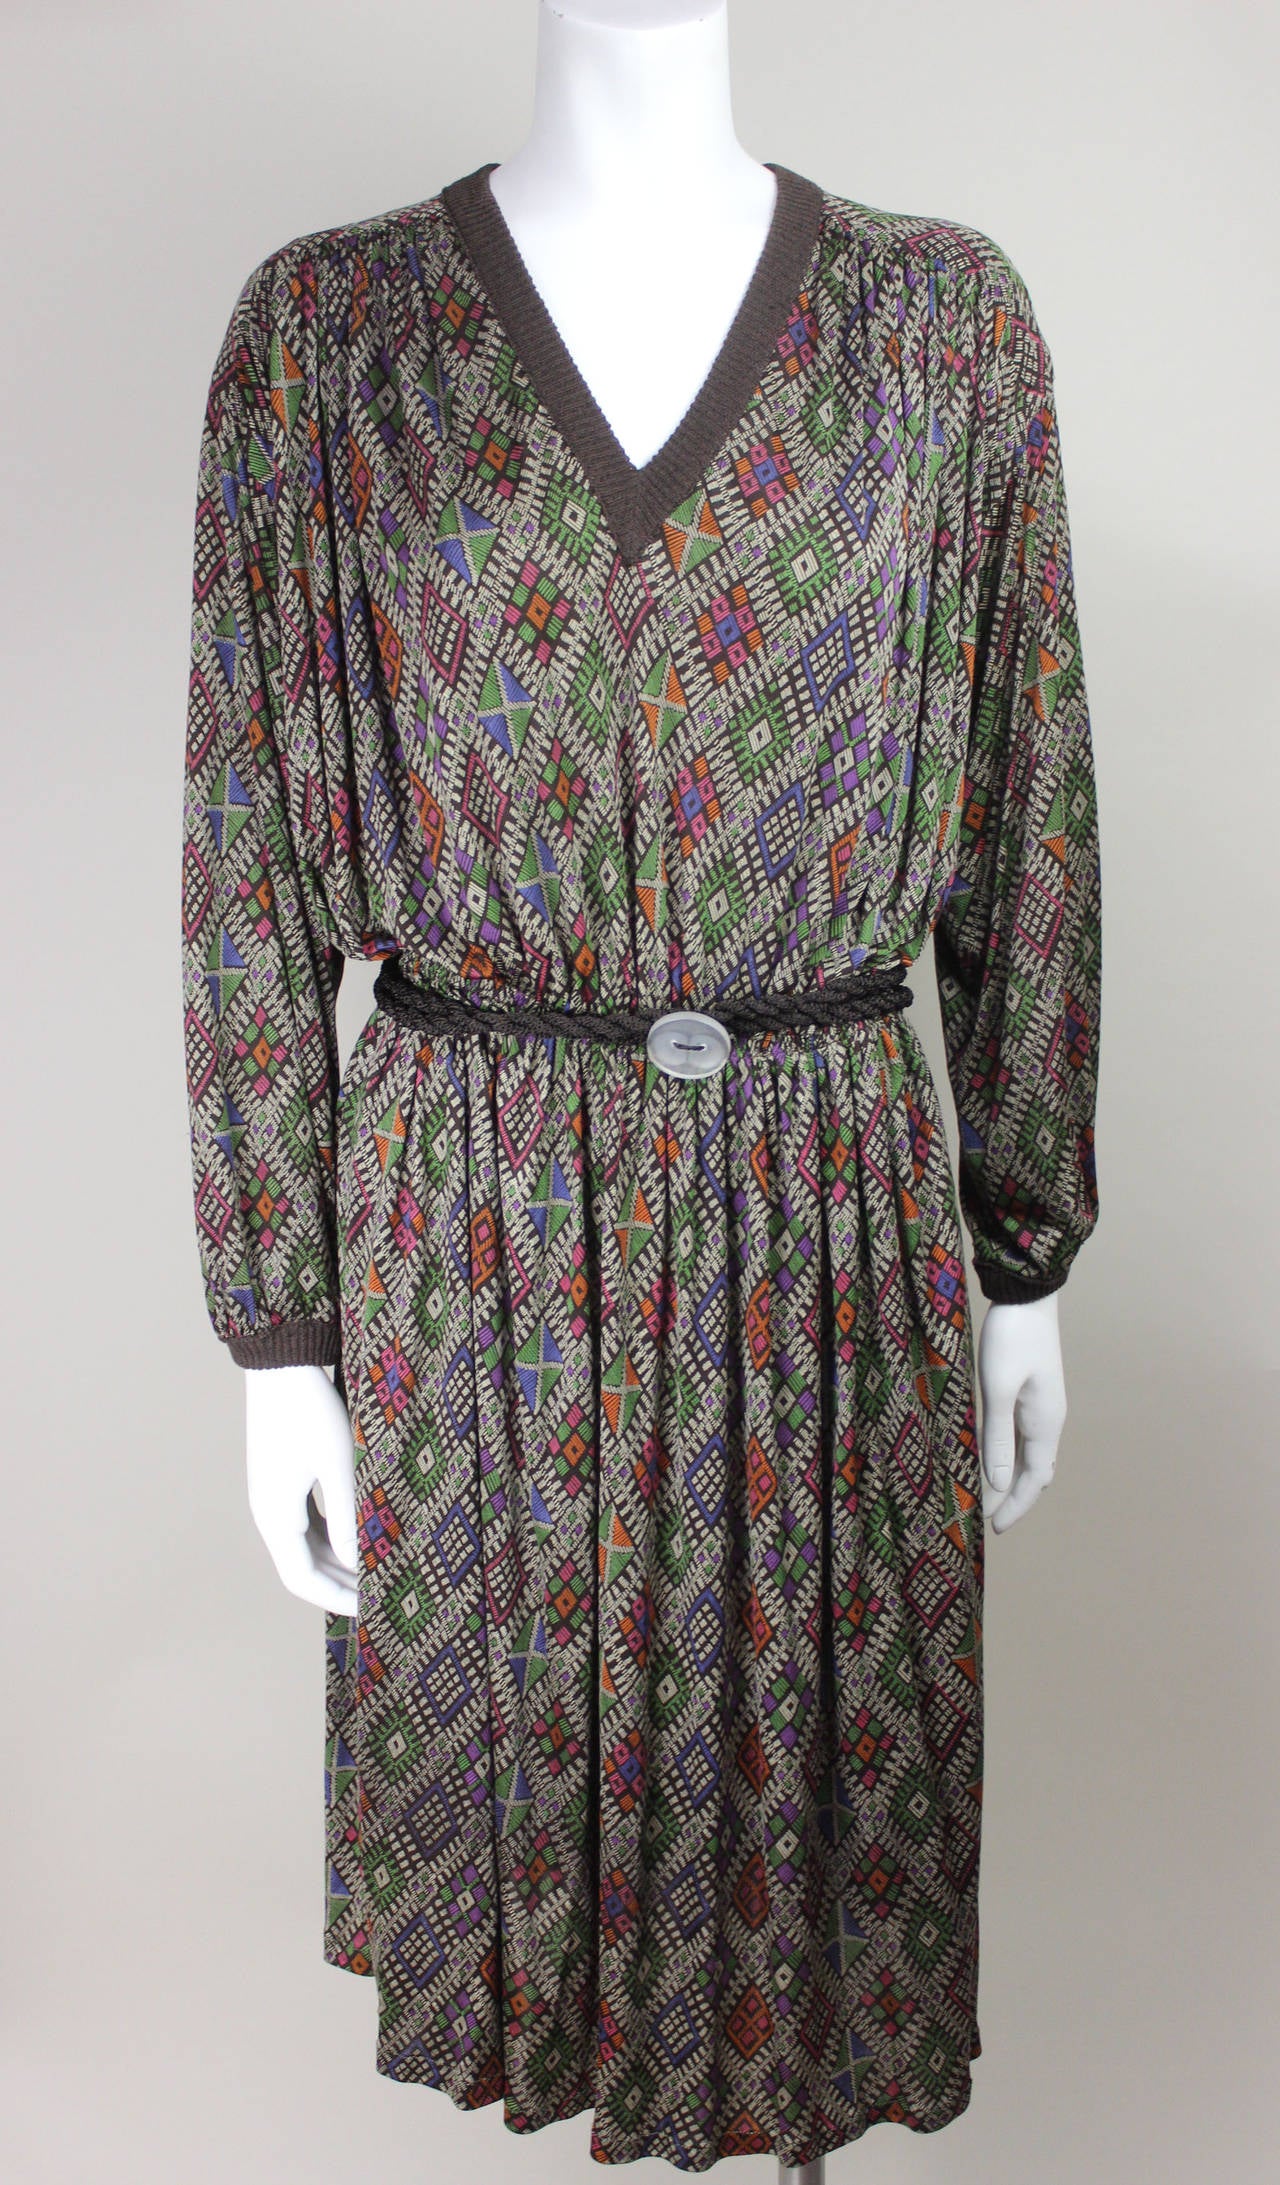 This is a rare Missoni from the 1970's with an abstract green, brown, and orange pattern. It has a deep V neck and is cinched at the waist with the original rope belt. It is a slinky, subtly sexy silhouette. This is the exact design that we are